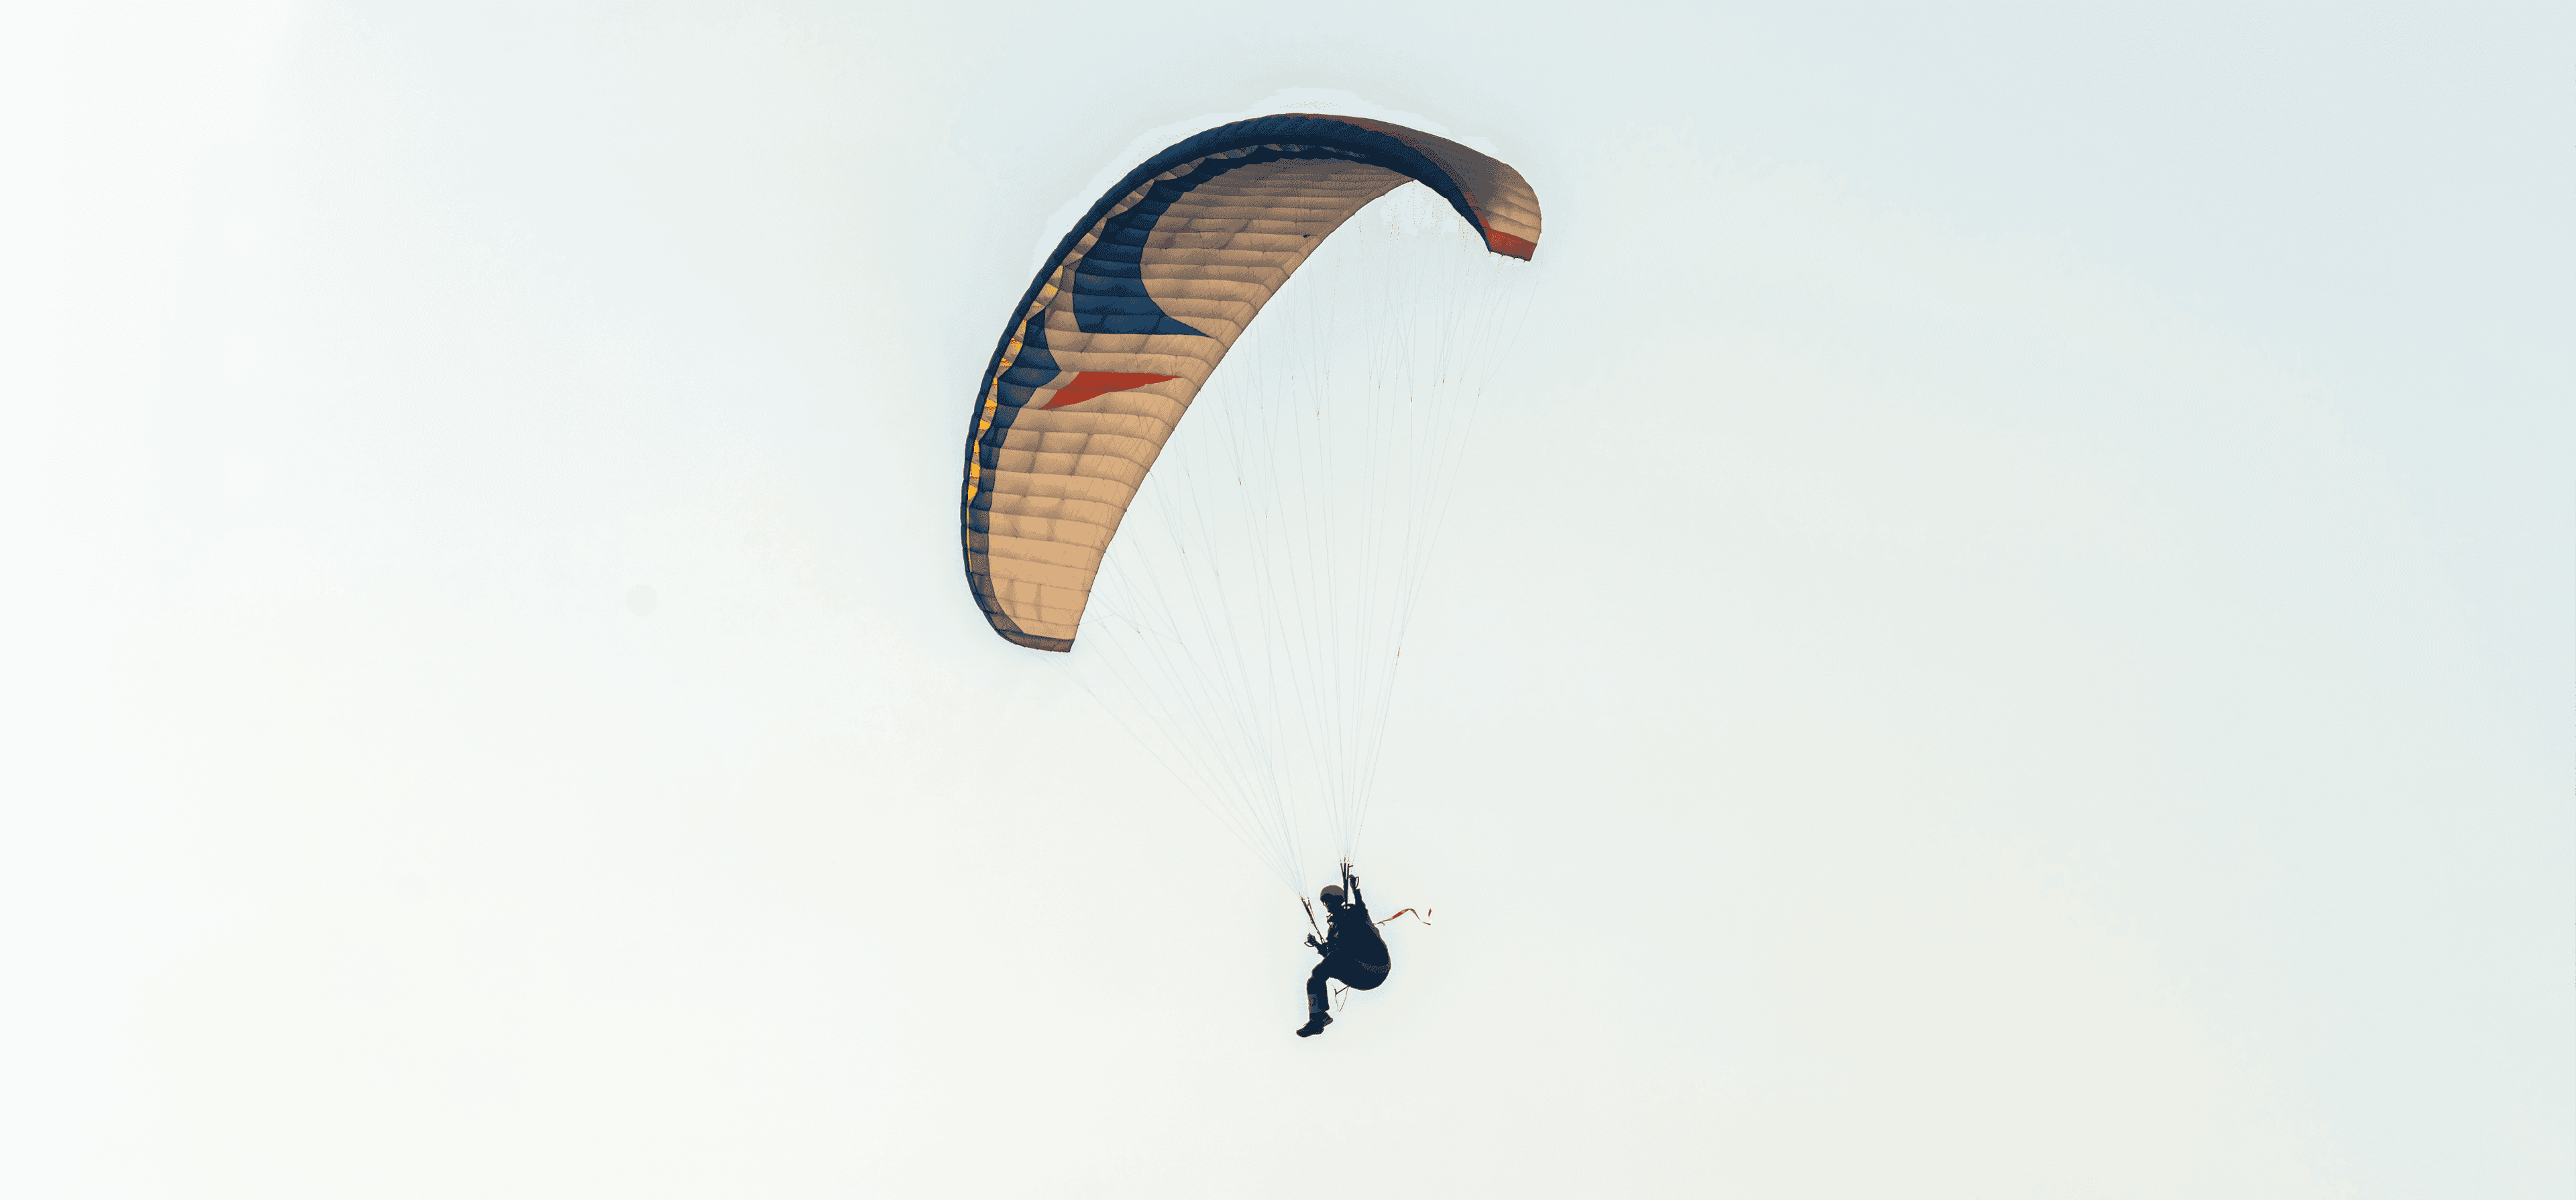 The Saudi Paragliding team is ranked tenth globally